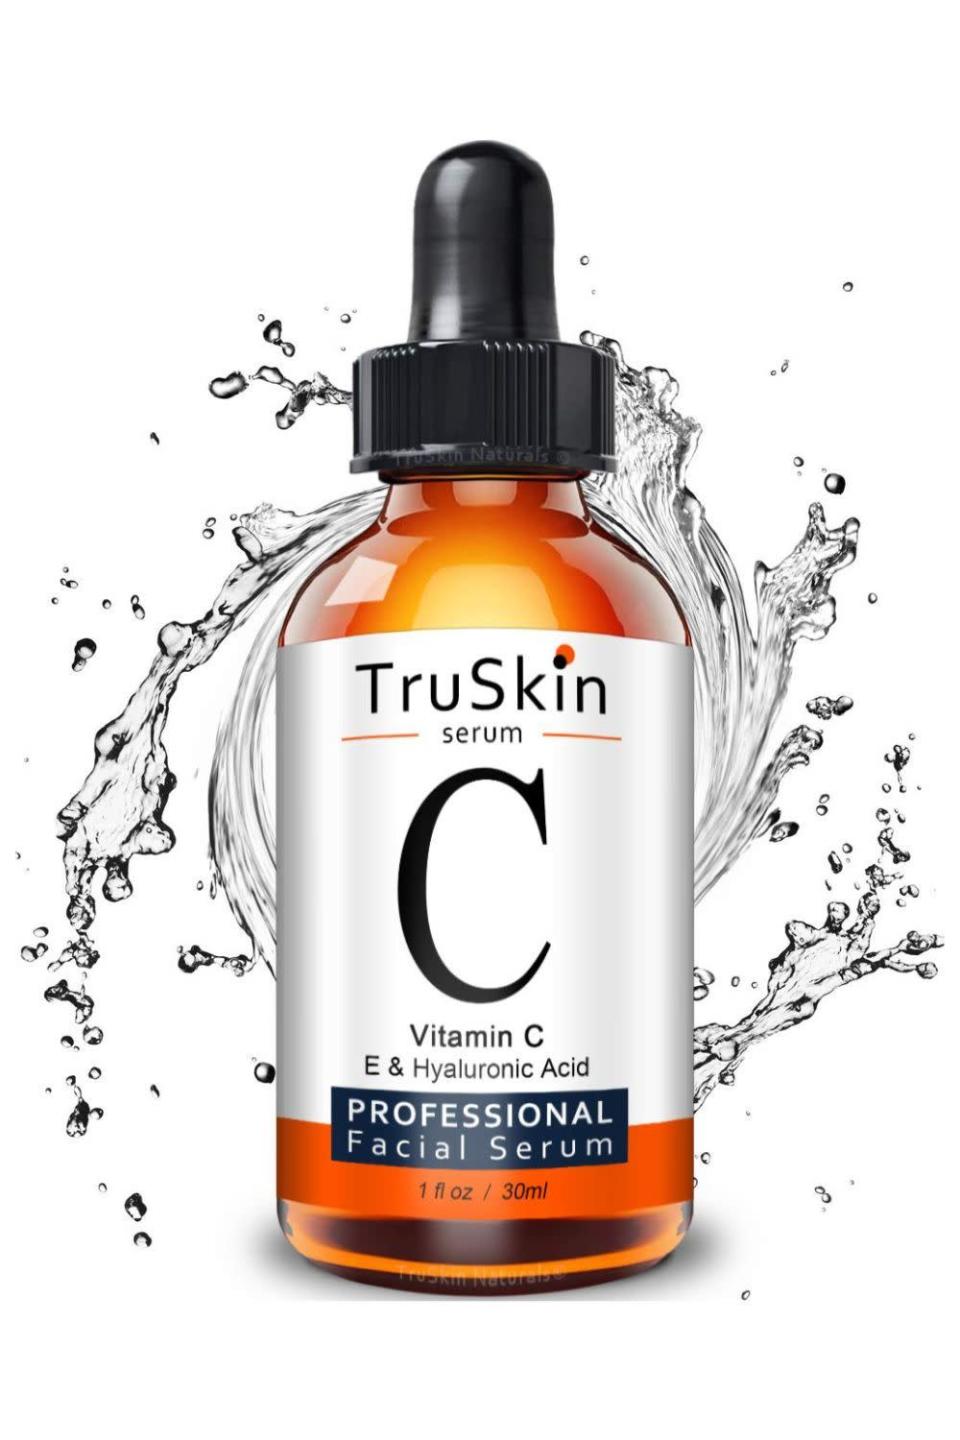 <p><strong>TruSkin Naturals</strong></p><p>amazon.com</p><p><strong>$19.99</strong></p><p><a href="https://www.amazon.com/dp/B01M4MCUAF?tag=syn-yahoo-20&ascsubtag=%5Bartid%7C10055.g.38414112%5Bsrc%7Cyahoo-us" rel="nofollow noopener" target="_blank" data-ylk="slk:Shop Now" class="link rapid-noclick-resp">Shop Now</a></p><p>With all the antioxidant and skin-brightening benefits of a vitamin C serum, pretty much everyone could use one in their skincare routine. This inexpensive option, which uses the vitamin C derivative sodium ascorbyl phosphate, comes highly recommended by more than 28,000 Amazon reviewers.</p>